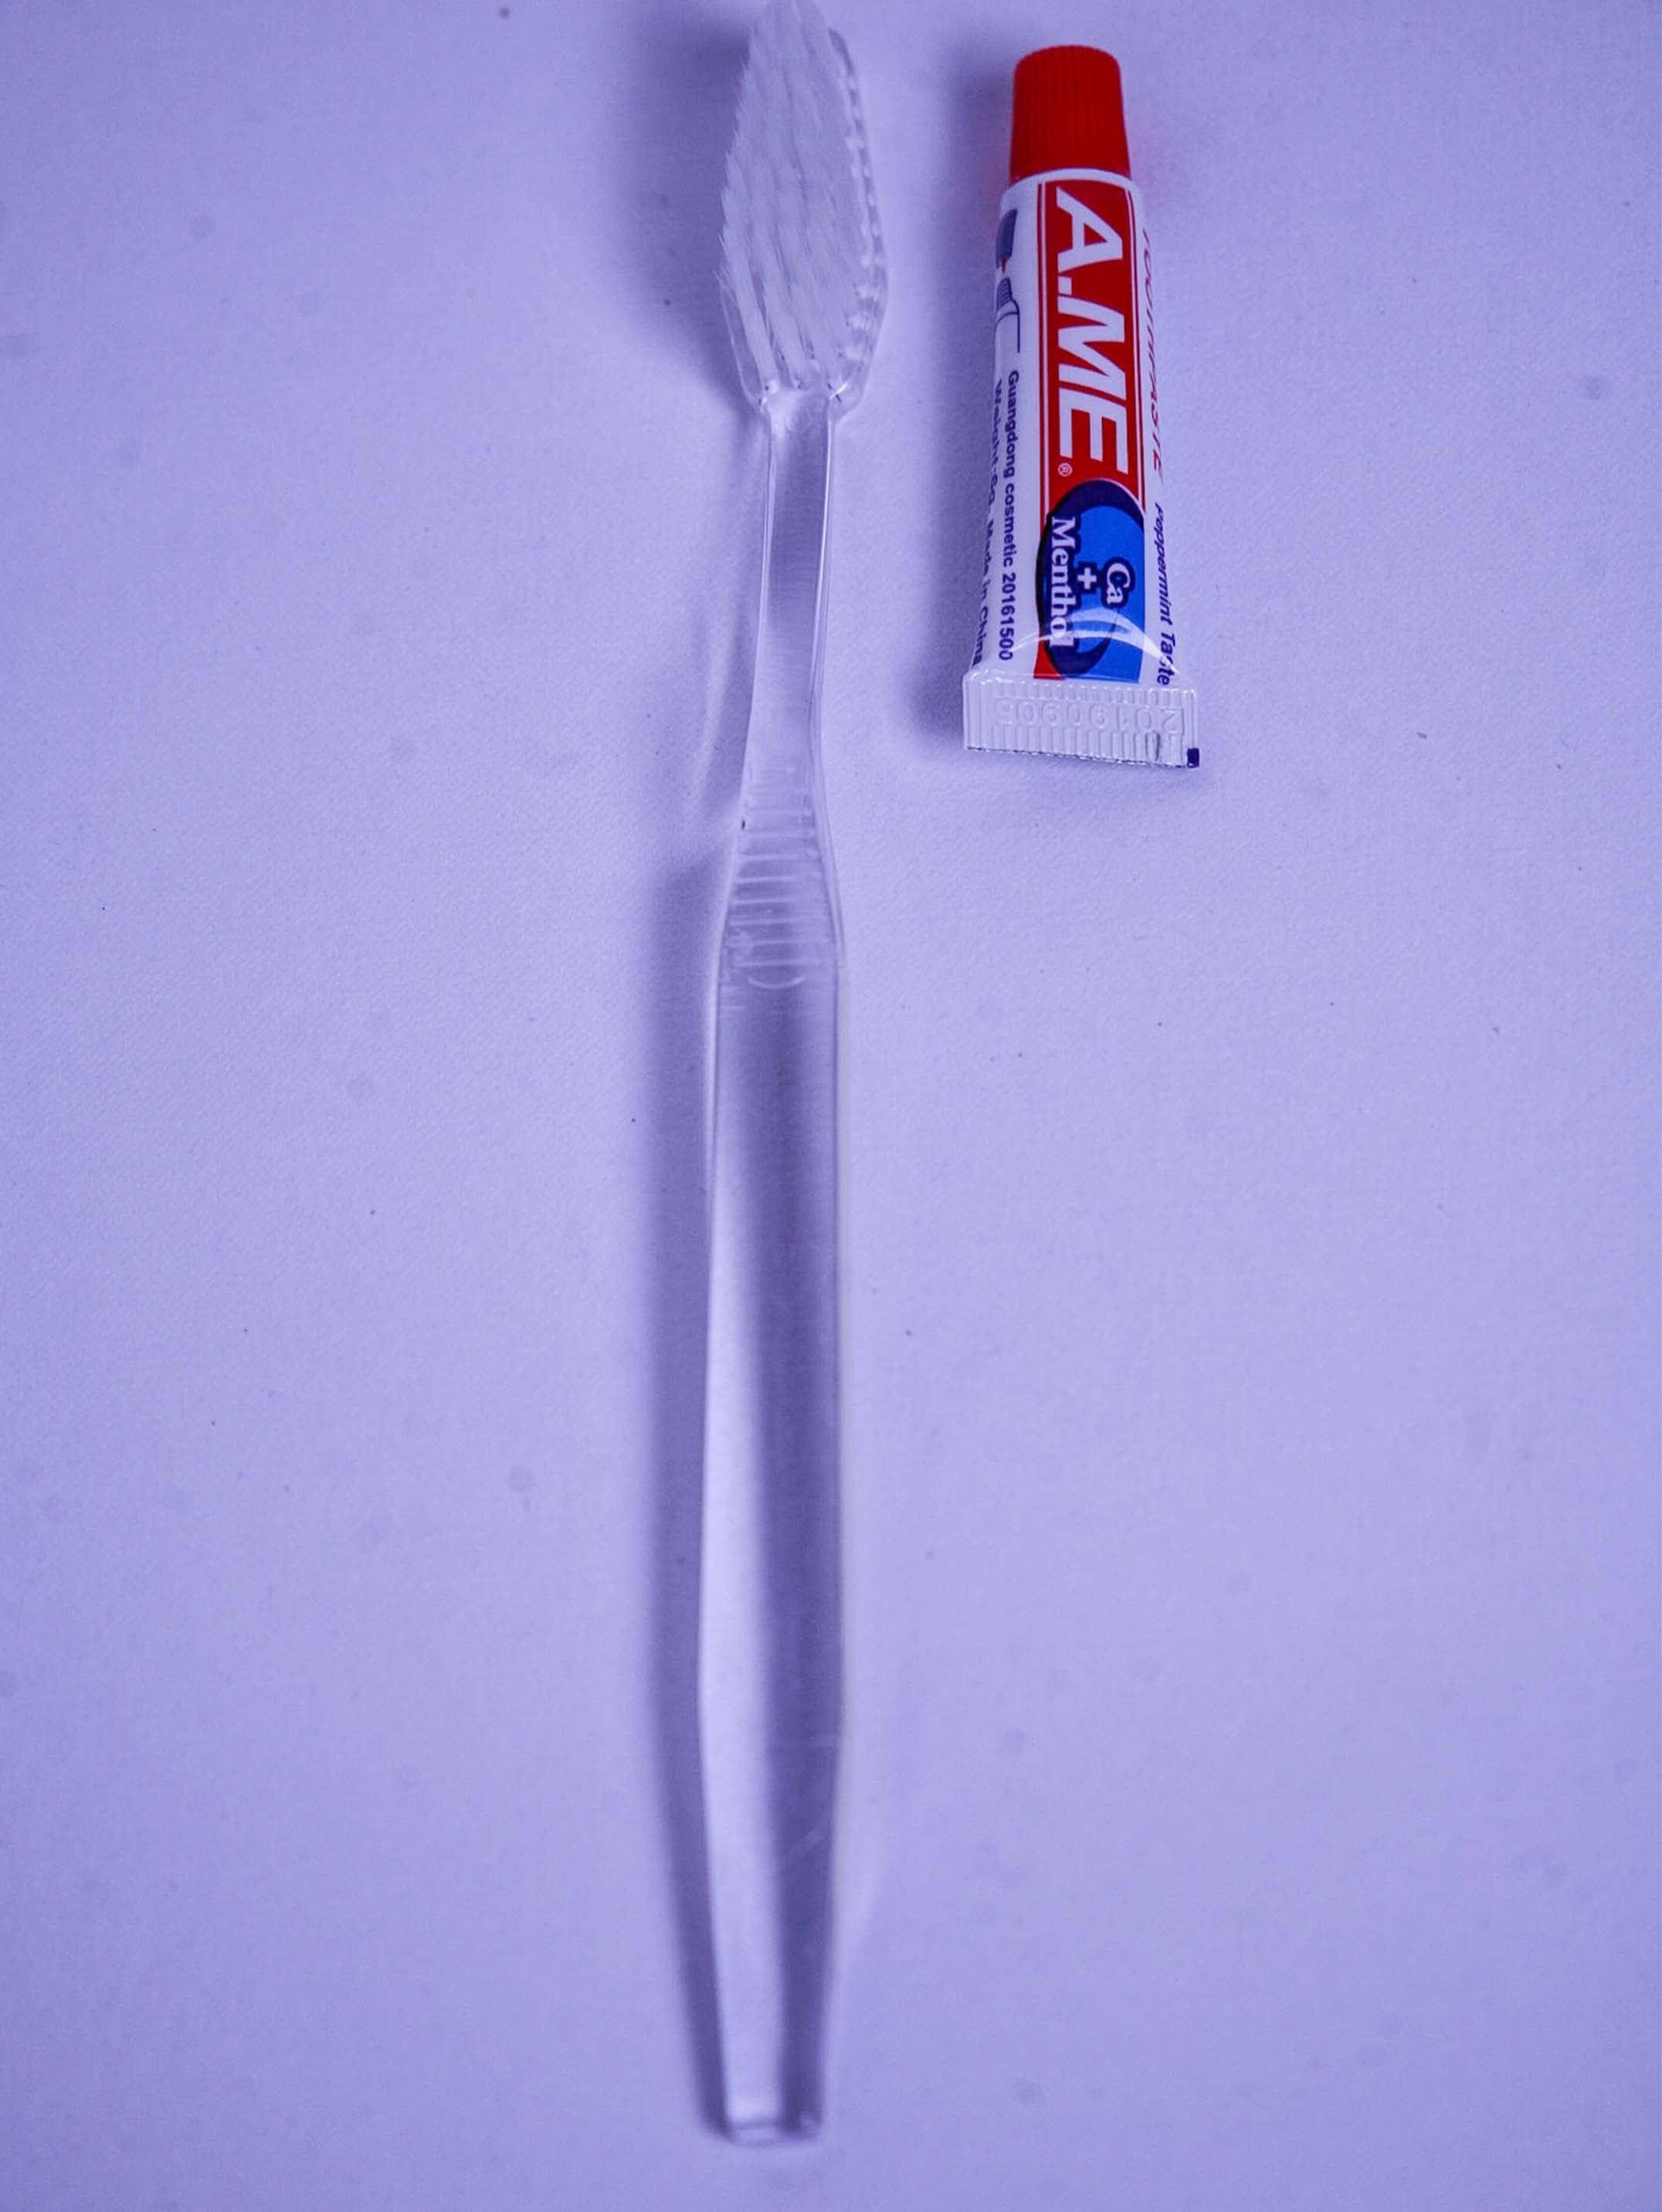 Dental Kit (Brush & Tooth Paste) Home and beyond 